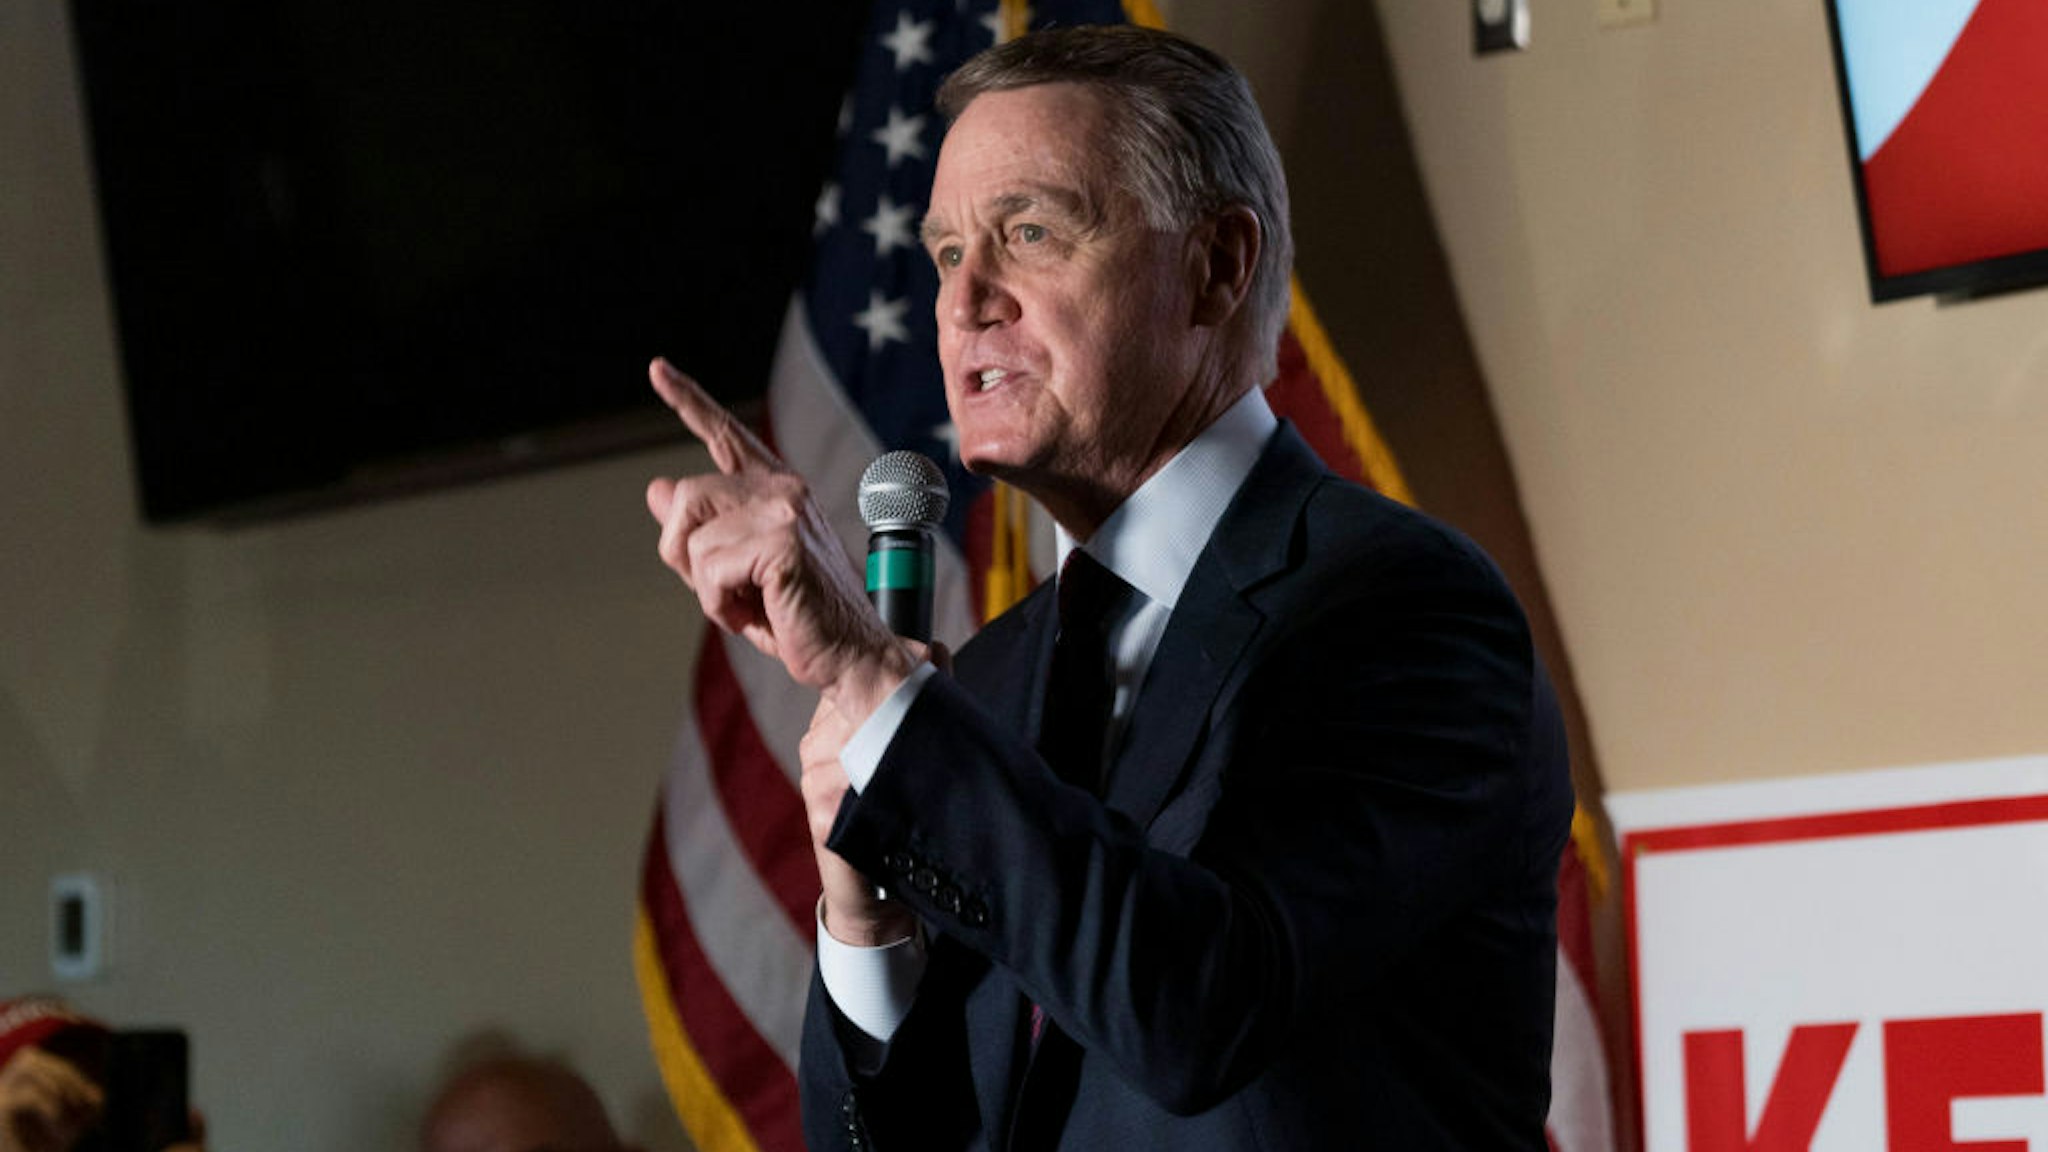 U.S. Sen David Perdue (R-GA) speaks at a campaign event to supporters at a restaurant on November 13, 2020 in Cumming, Georgia.